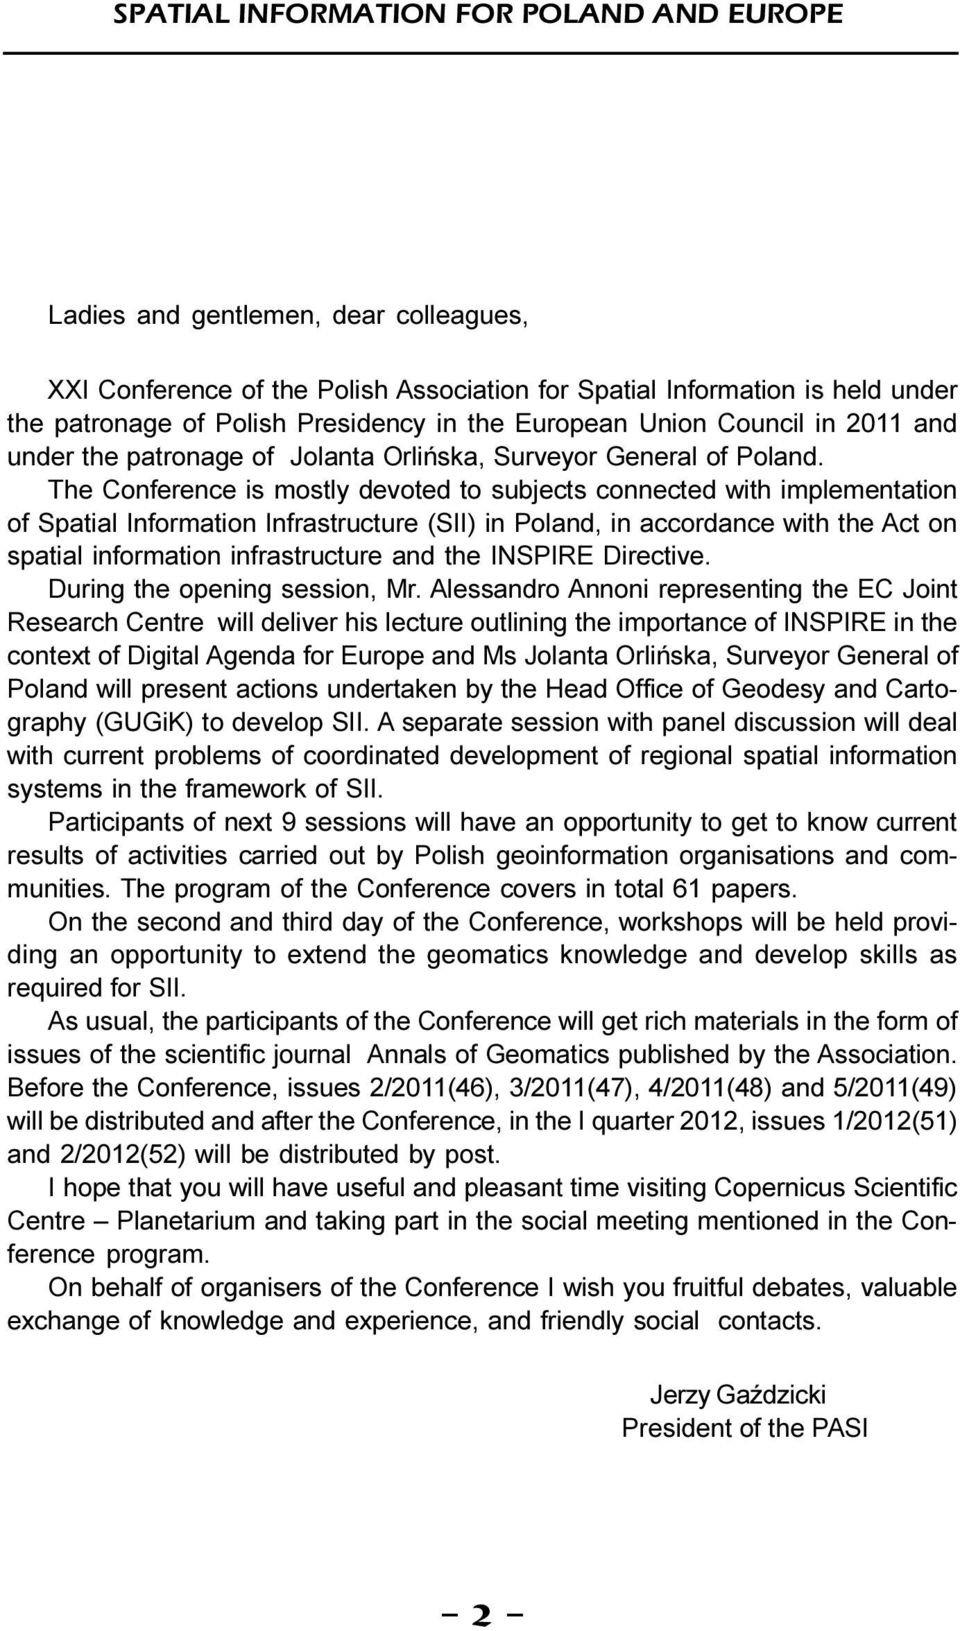 The Conference is ostly devoted to subjects connected with ipleentation of Spatial Inforation Infrastructure (SII) in Poland, in accordance with the Act on spatial inforation infrastructure and the